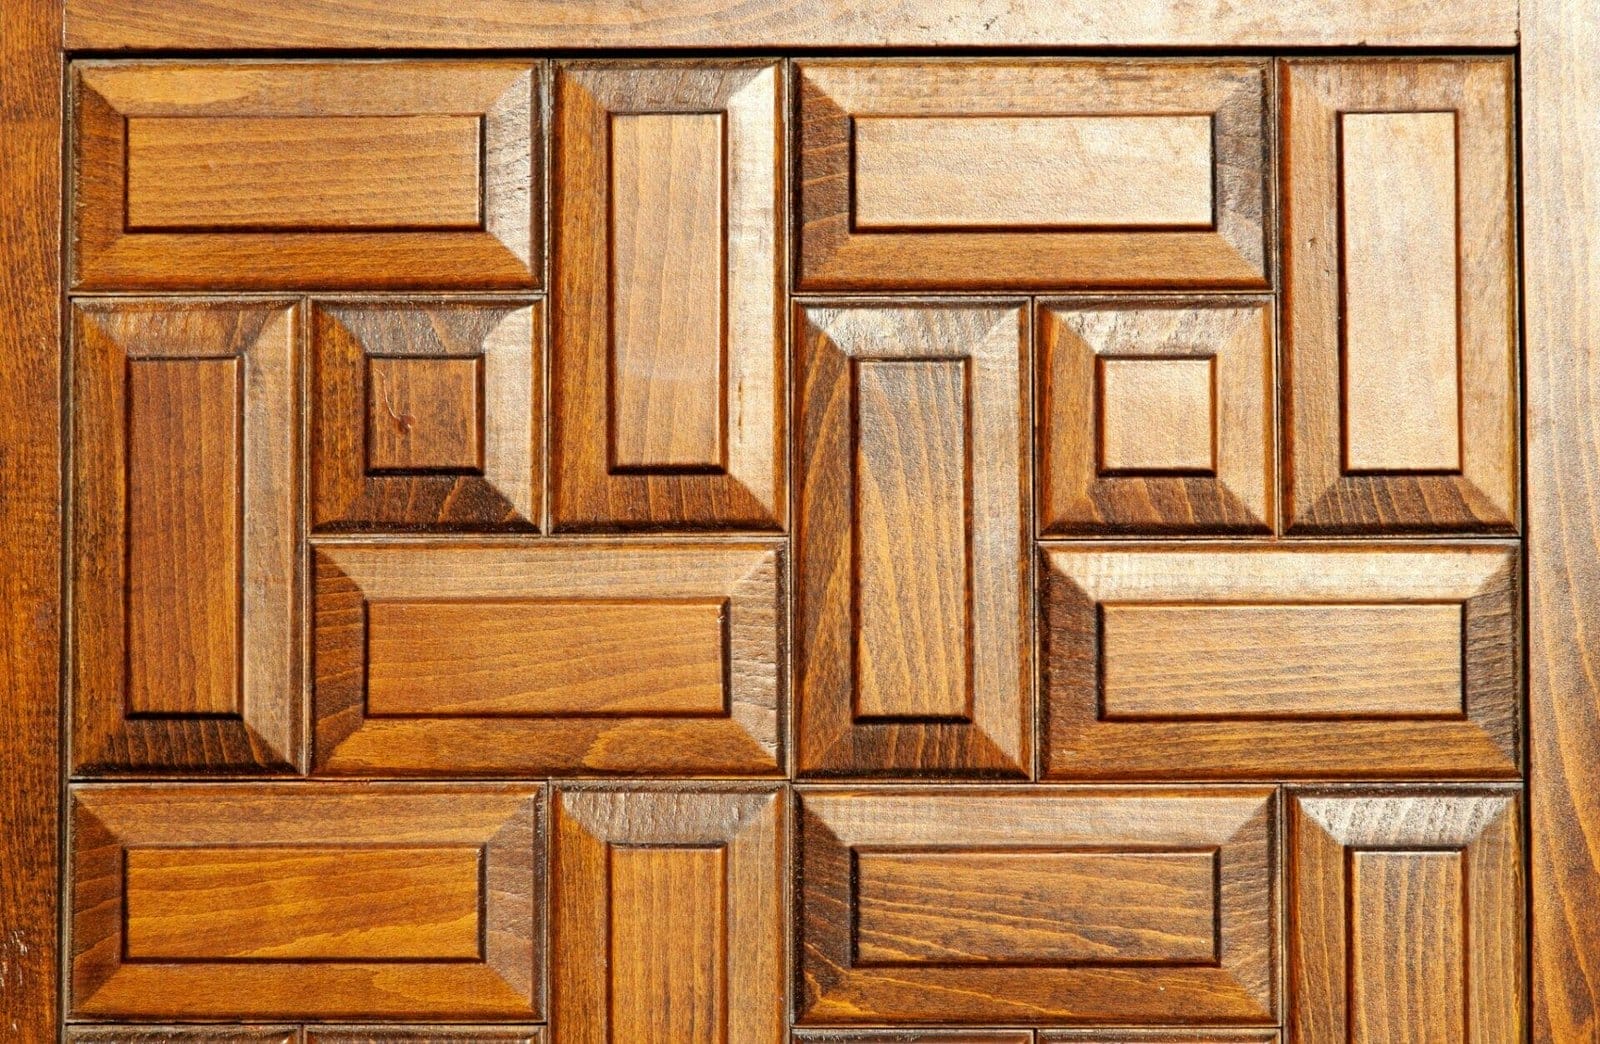 How to Paint a Door to Look Like Wood: Transform Your Door with These Easy Steps